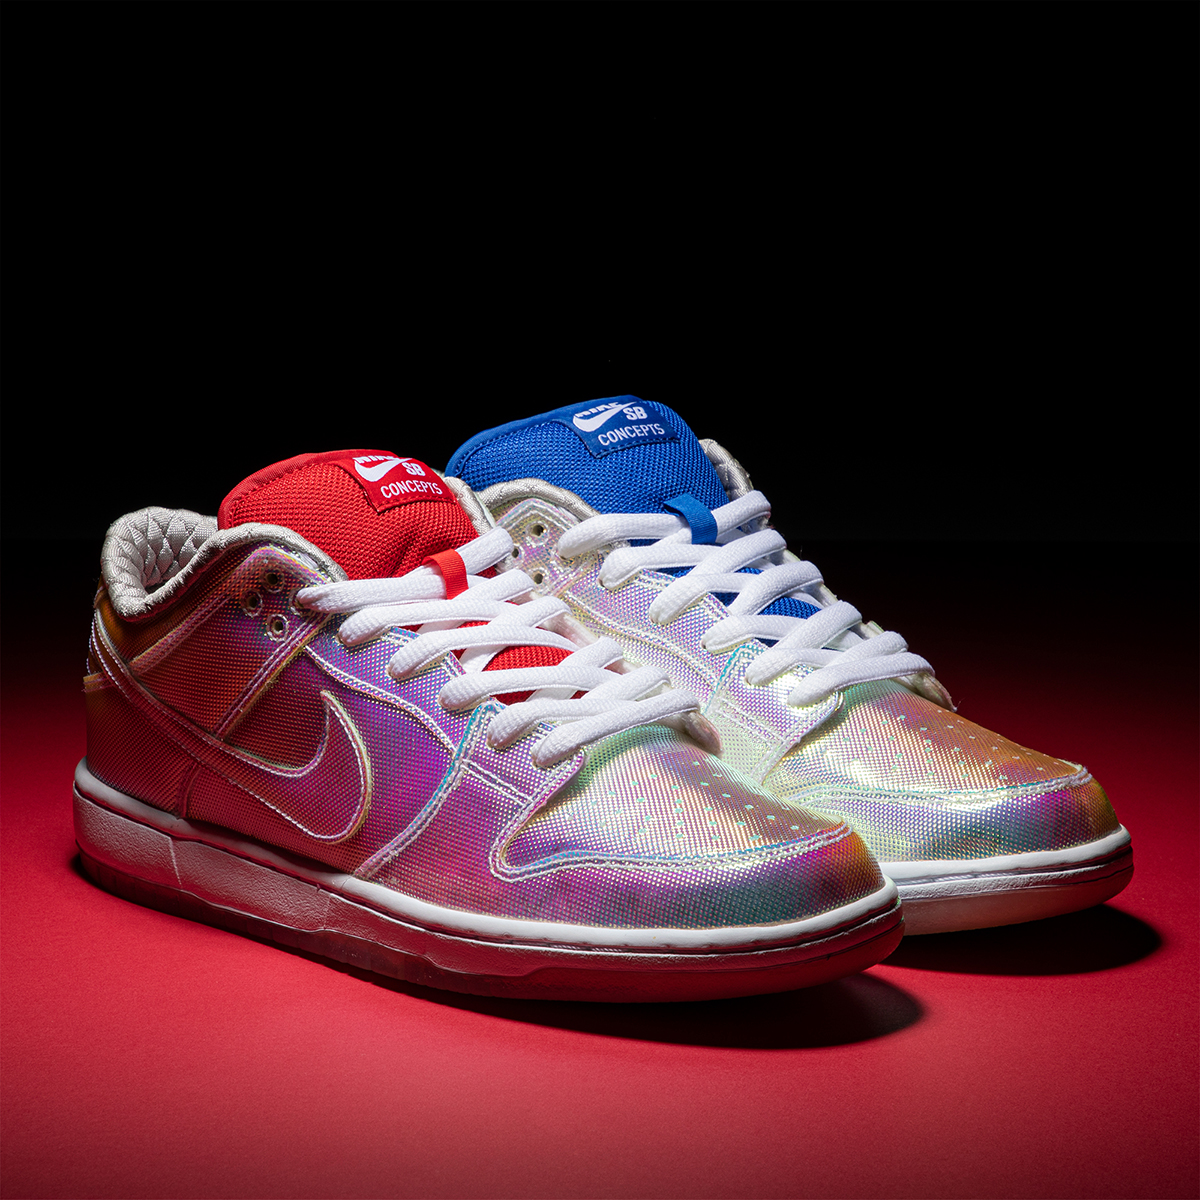 Concepts Nike SB Holy Grail Pack